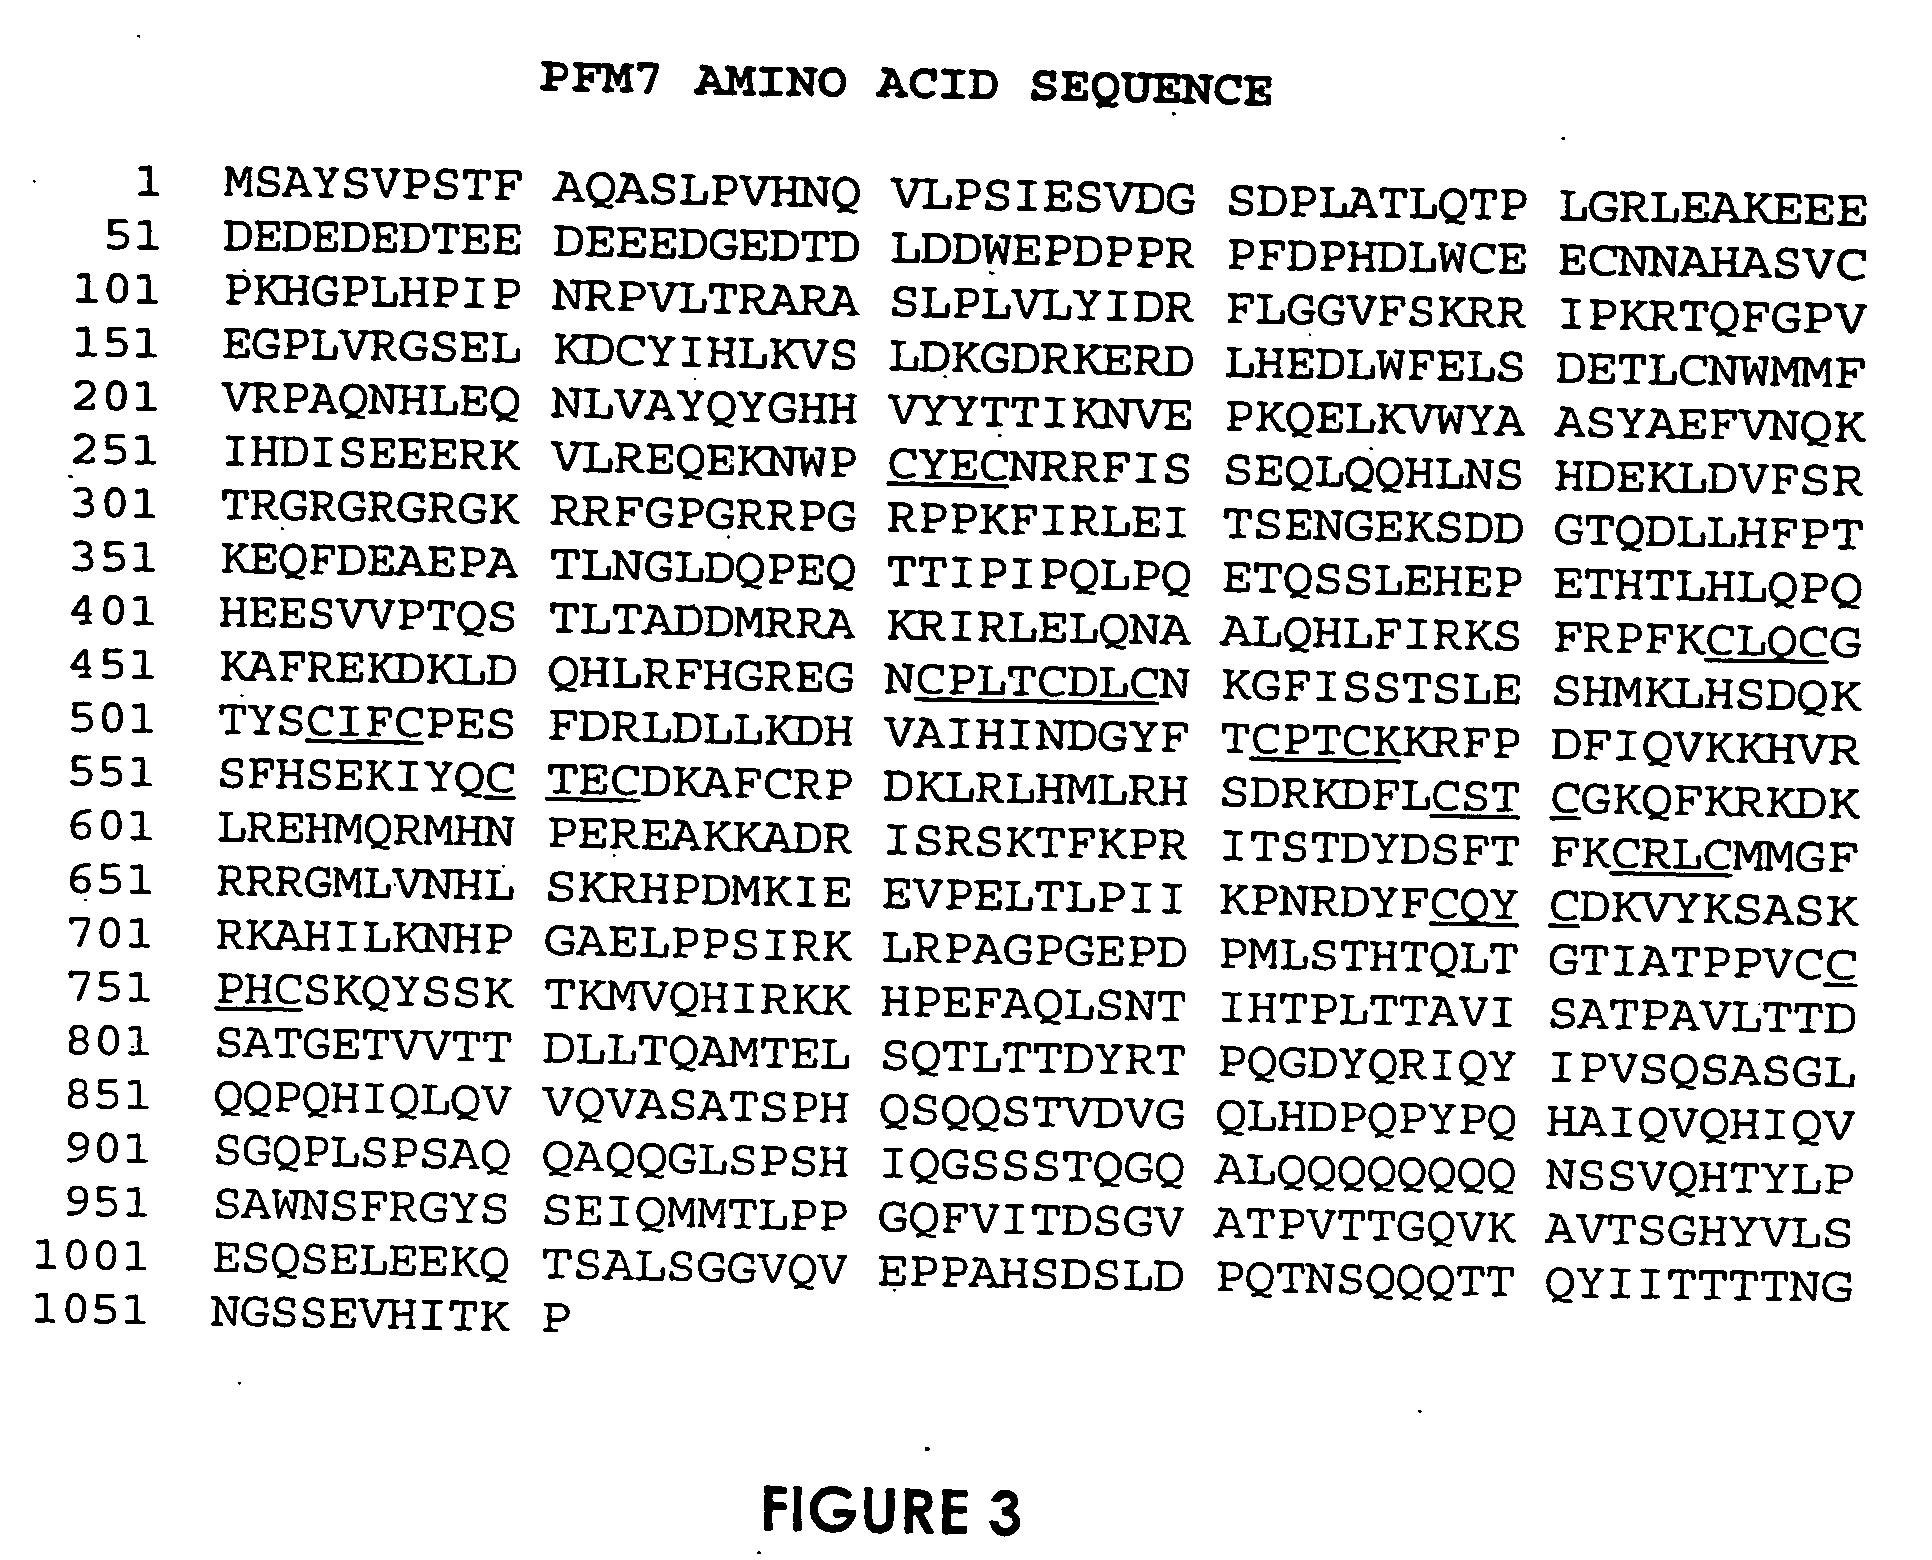 PR/SET-domain containing nucleic acids, polypeptides, antibodies and methods of use